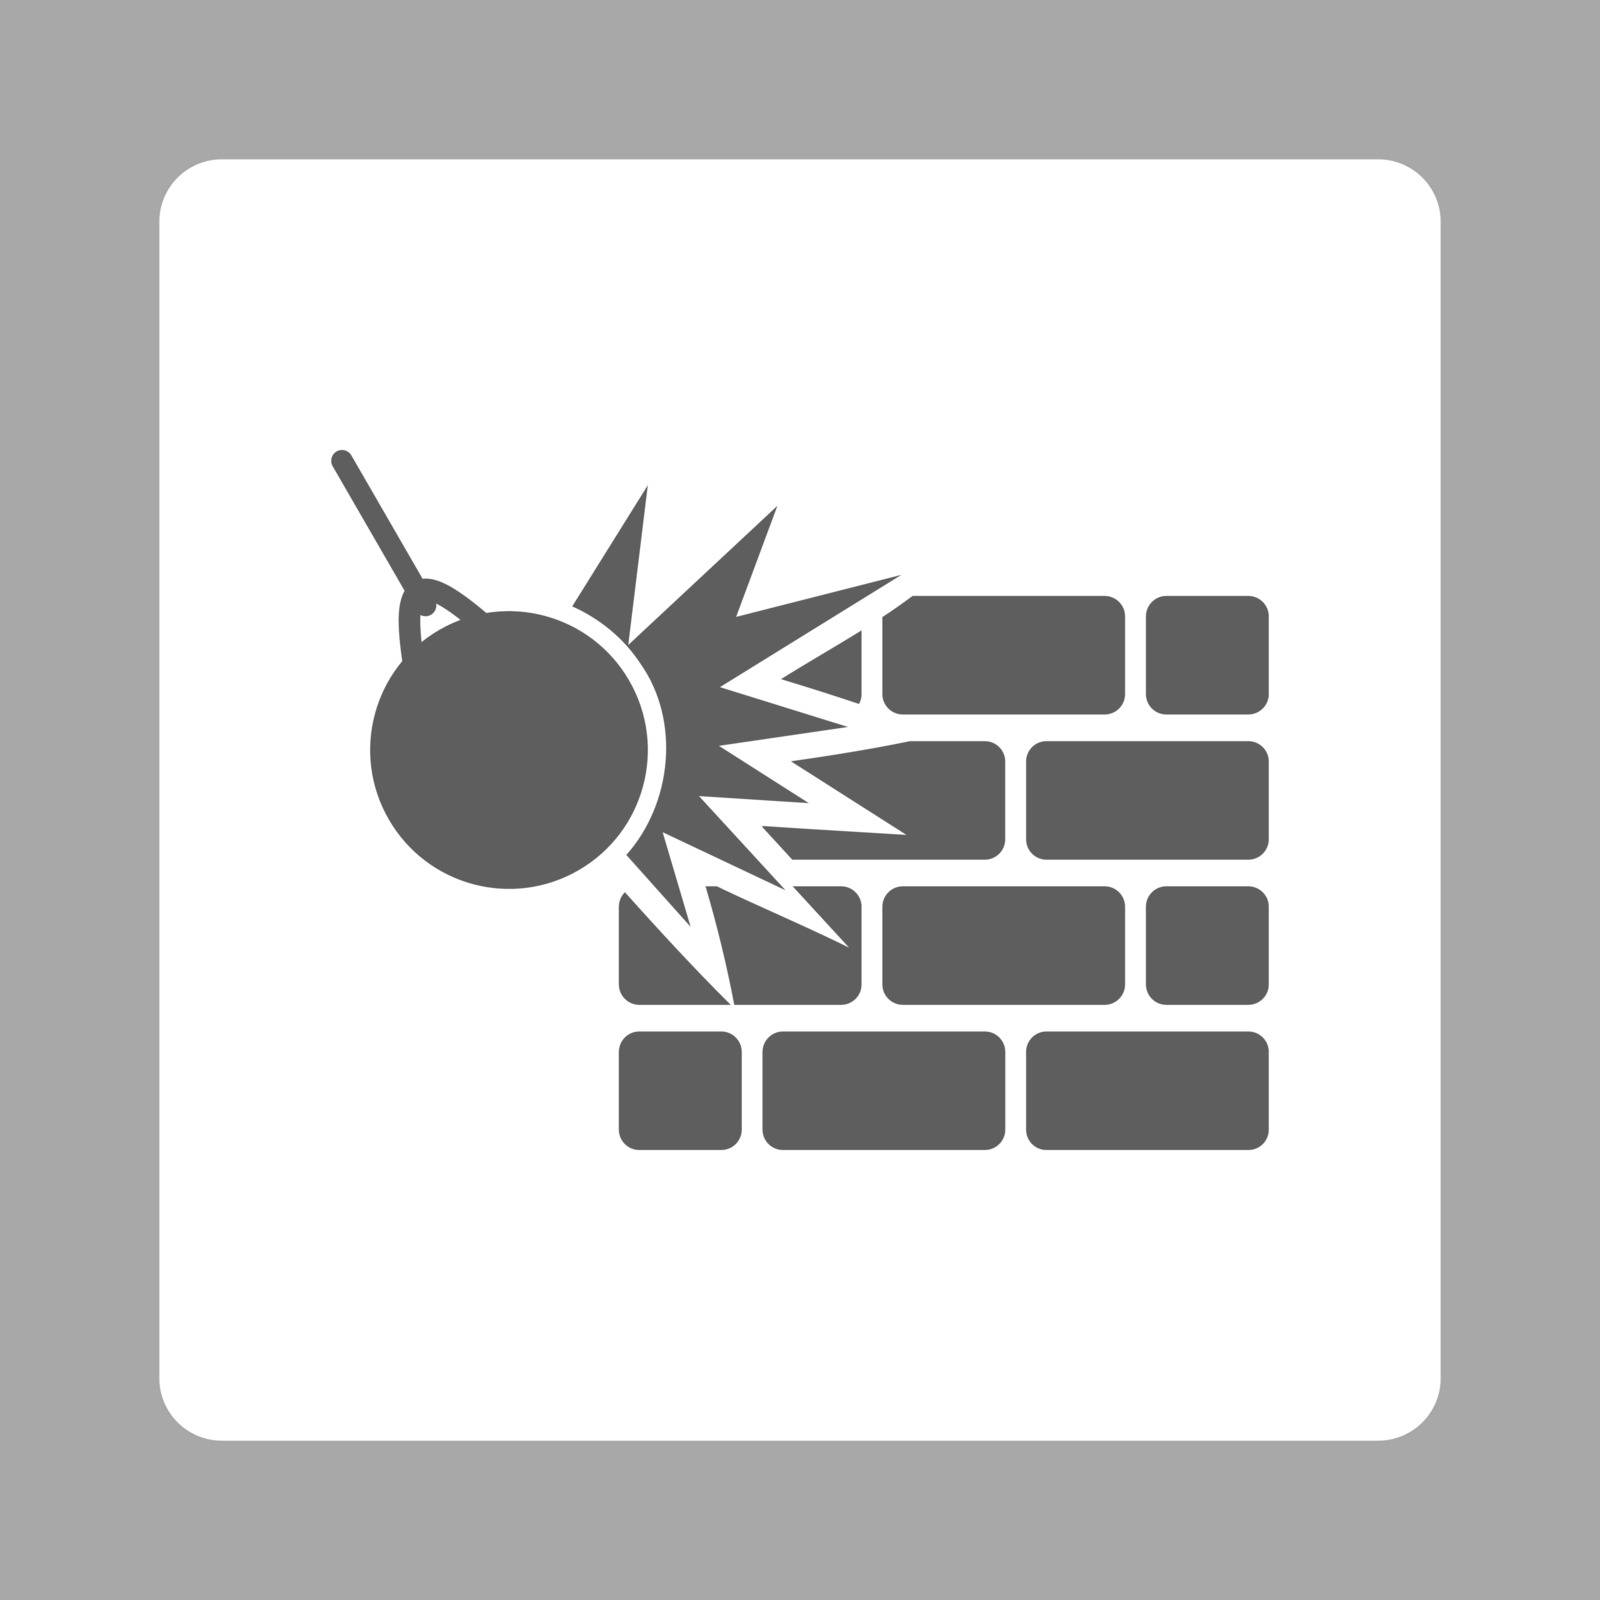 Destruction icon. Vector style is dark gray and white colors, flat rounded square button on a silver background.